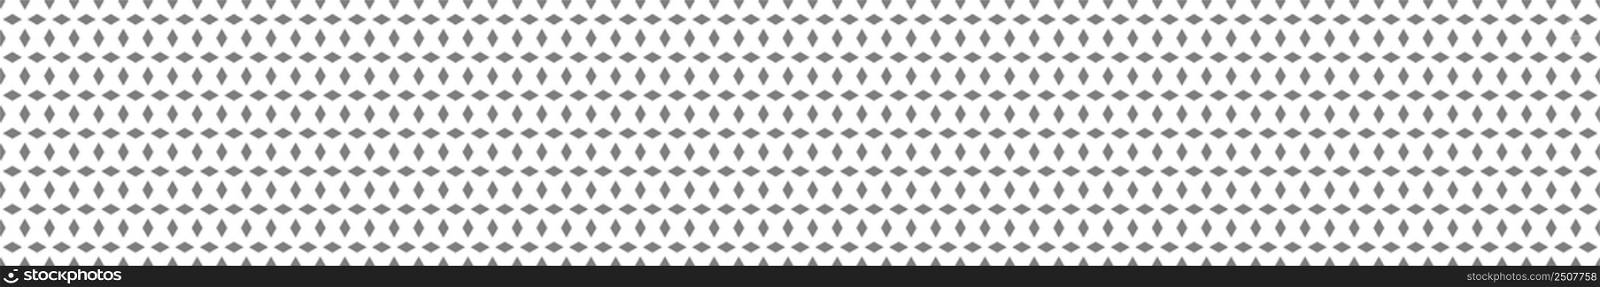 Seamless geometric pattern of small diamonds for texture, textiles, banners and simple backgrounds